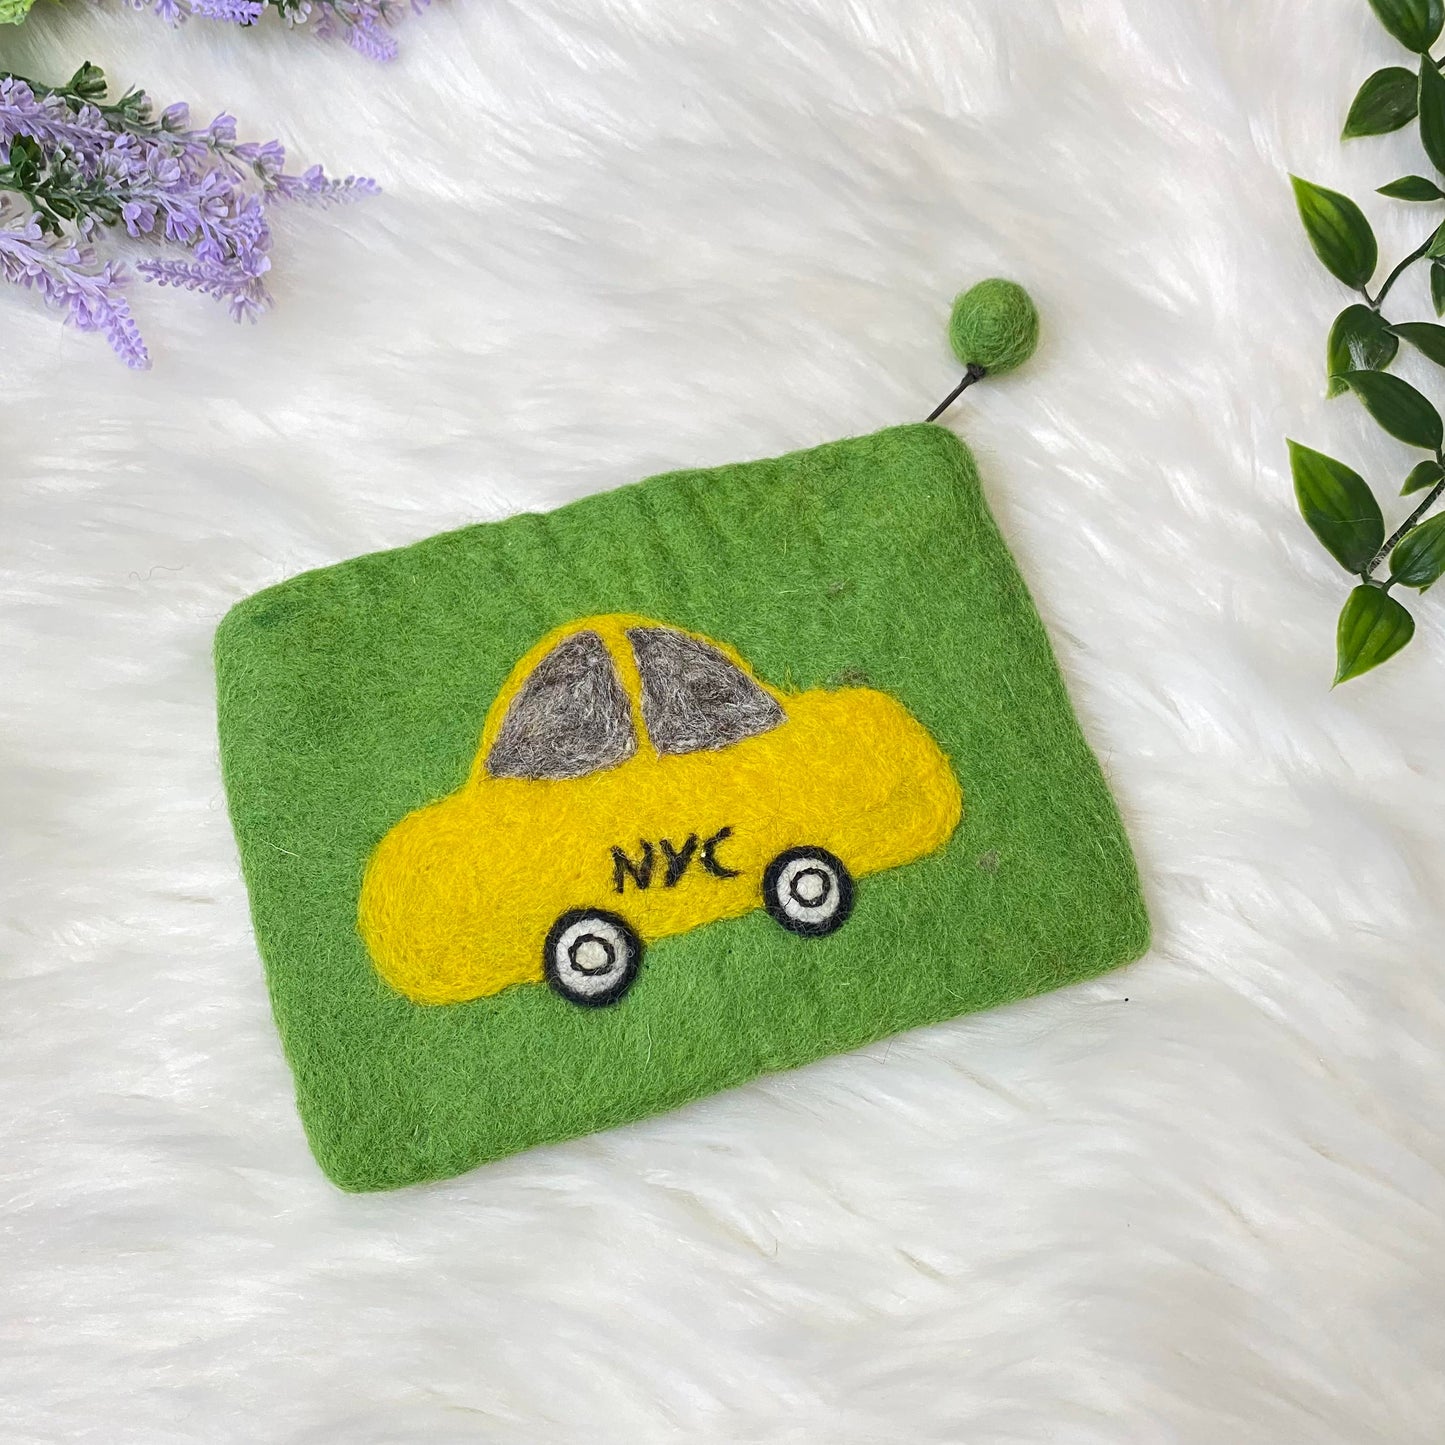 Car Designed Coin Purse For Kids